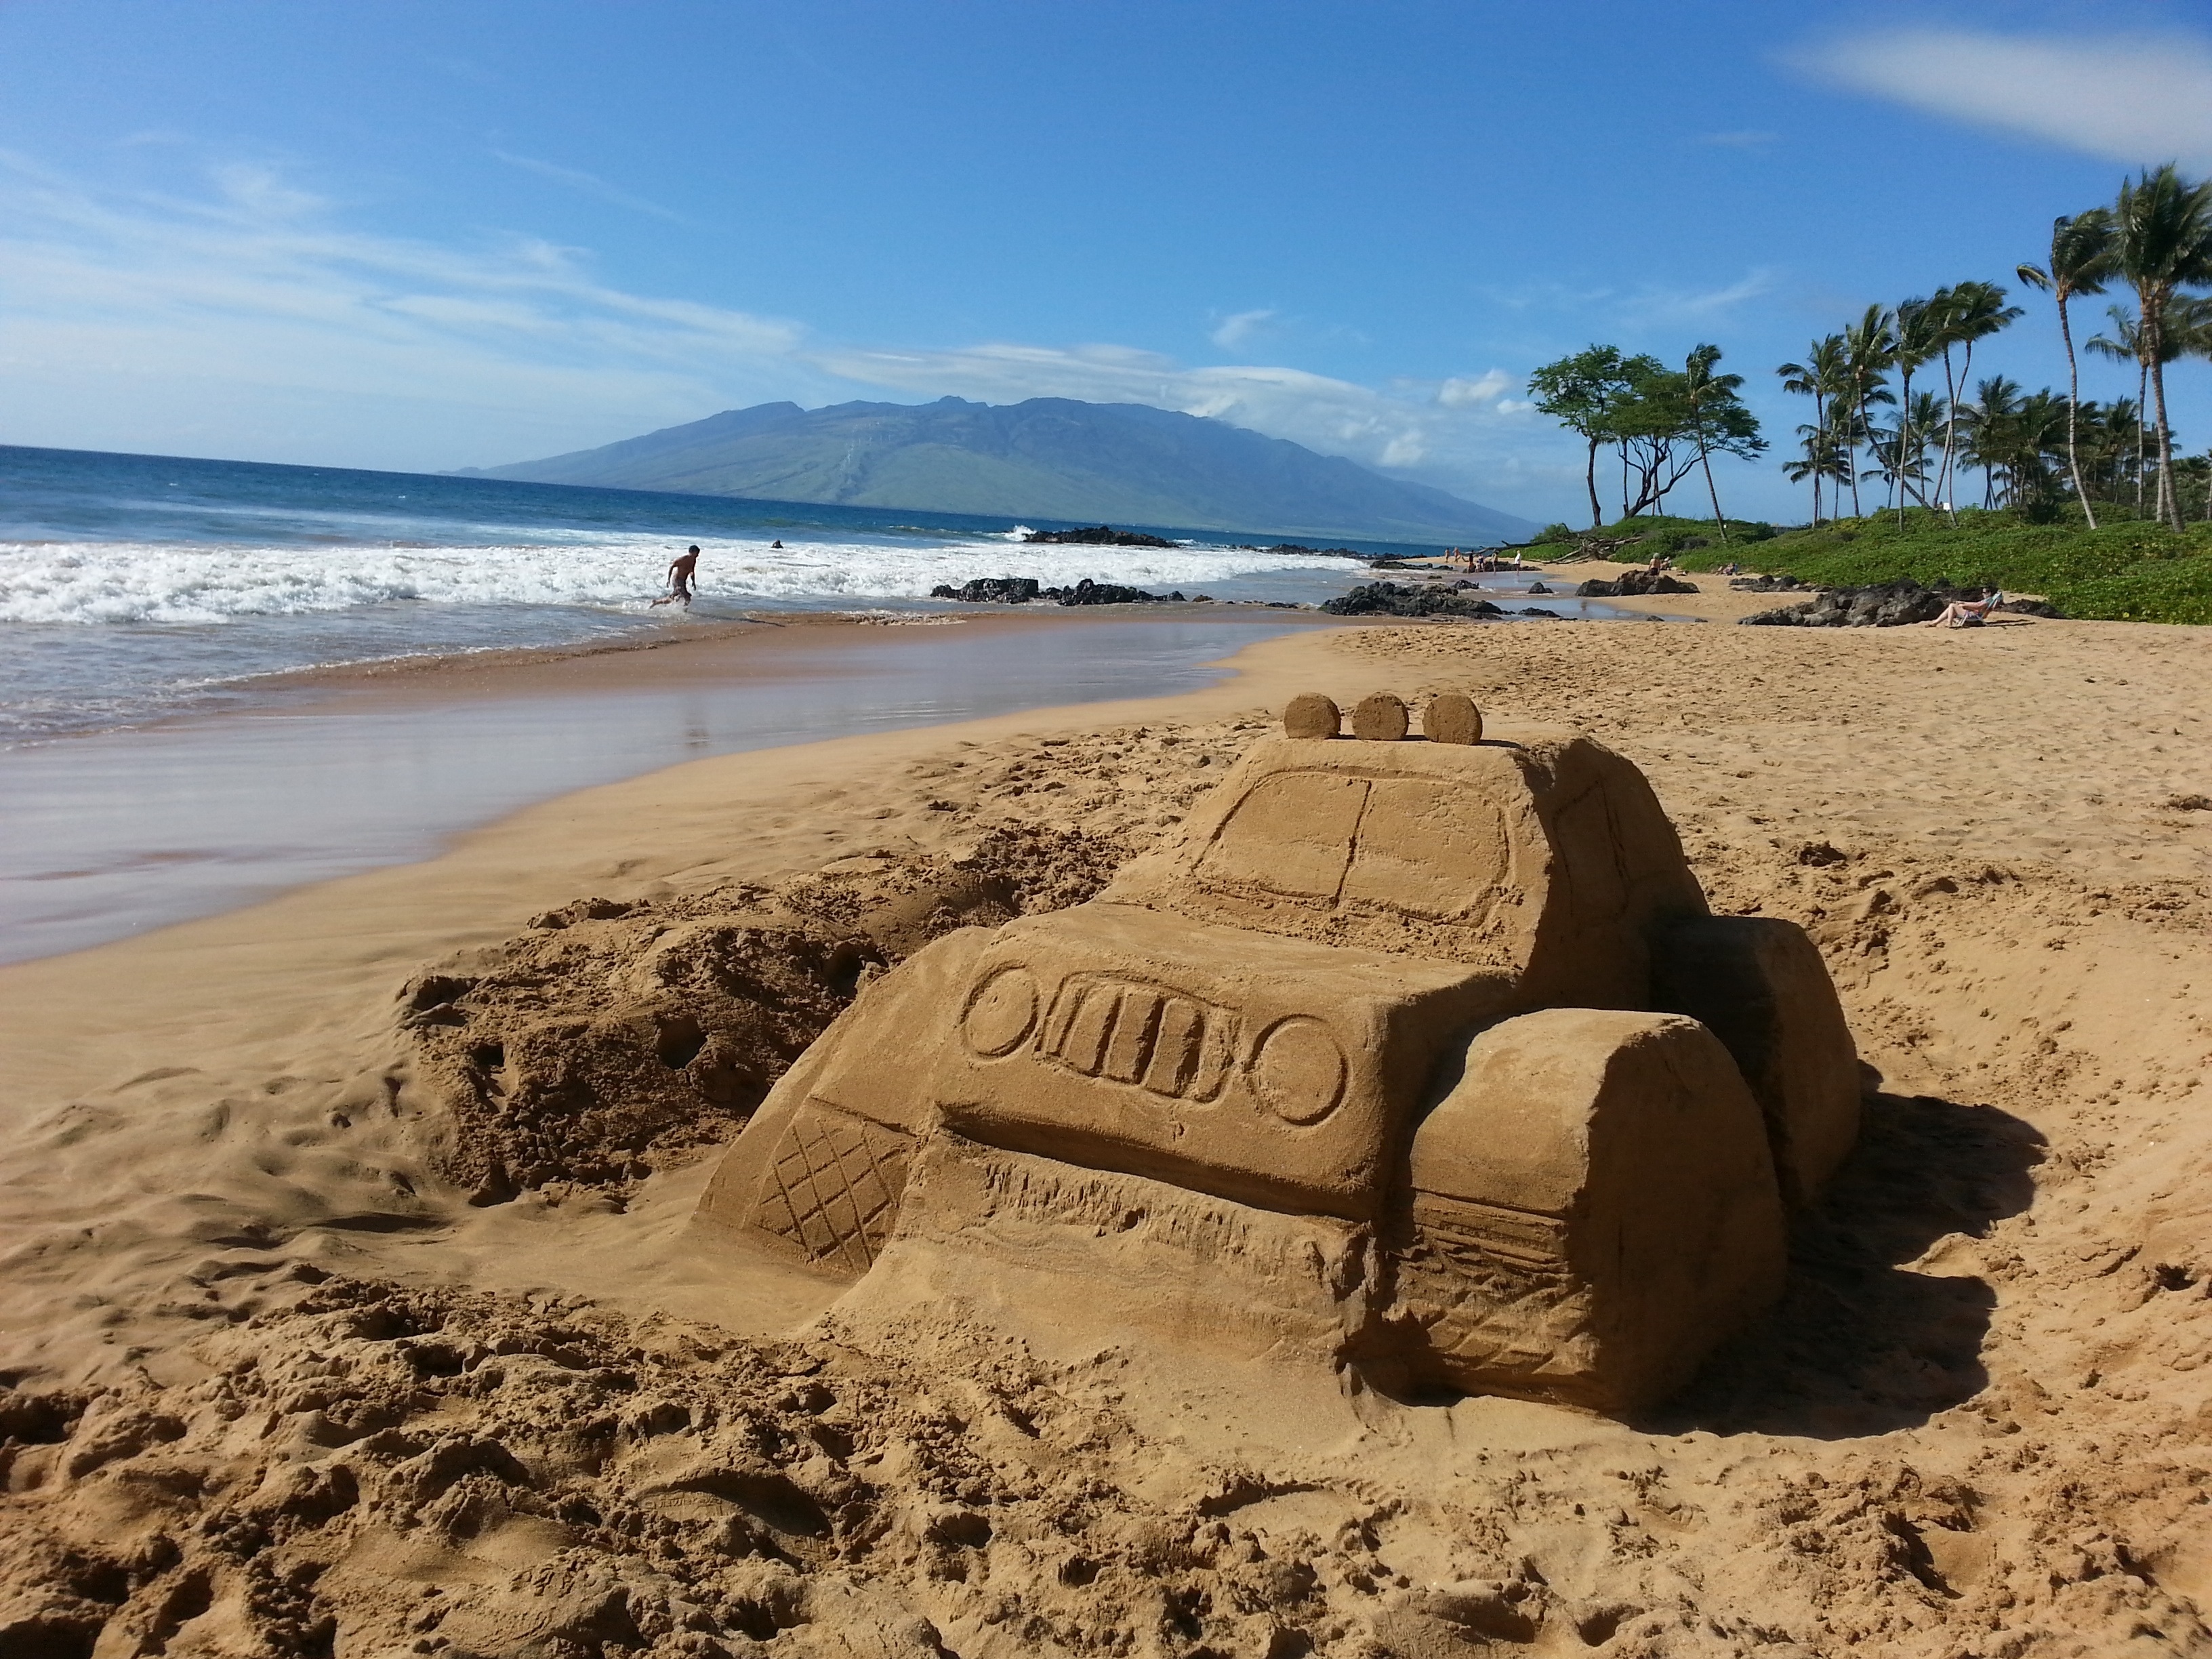 Jeep Sandcastle - Wailea Beach, Maui, imagery associated with clarifying values in life